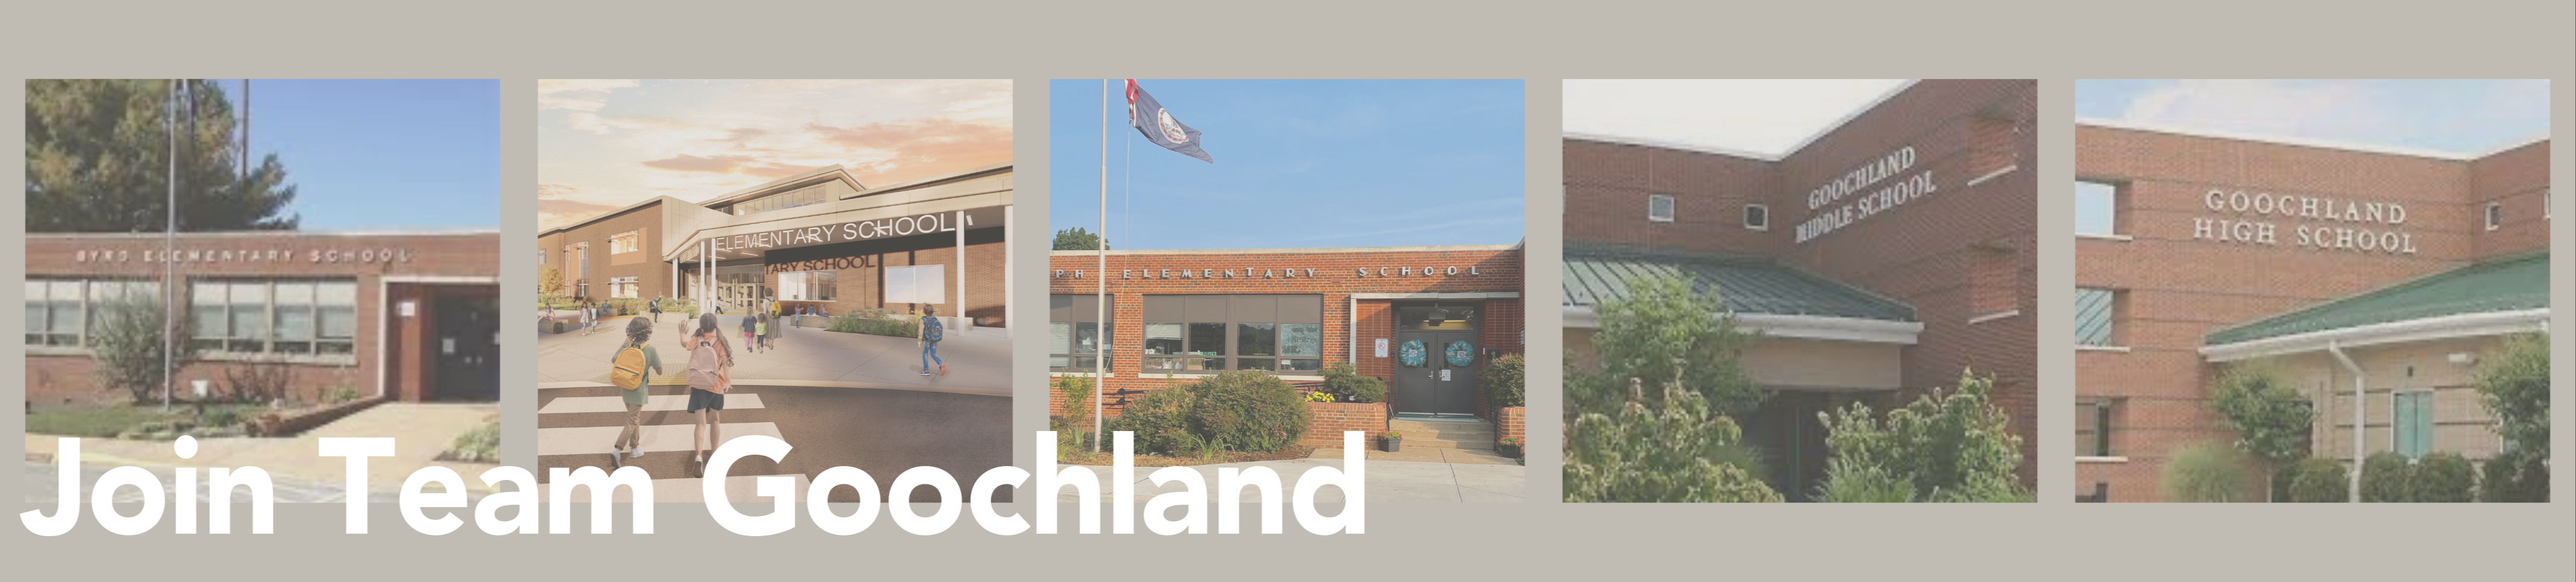 Pictures of each school building with text saying Join Team Goochland